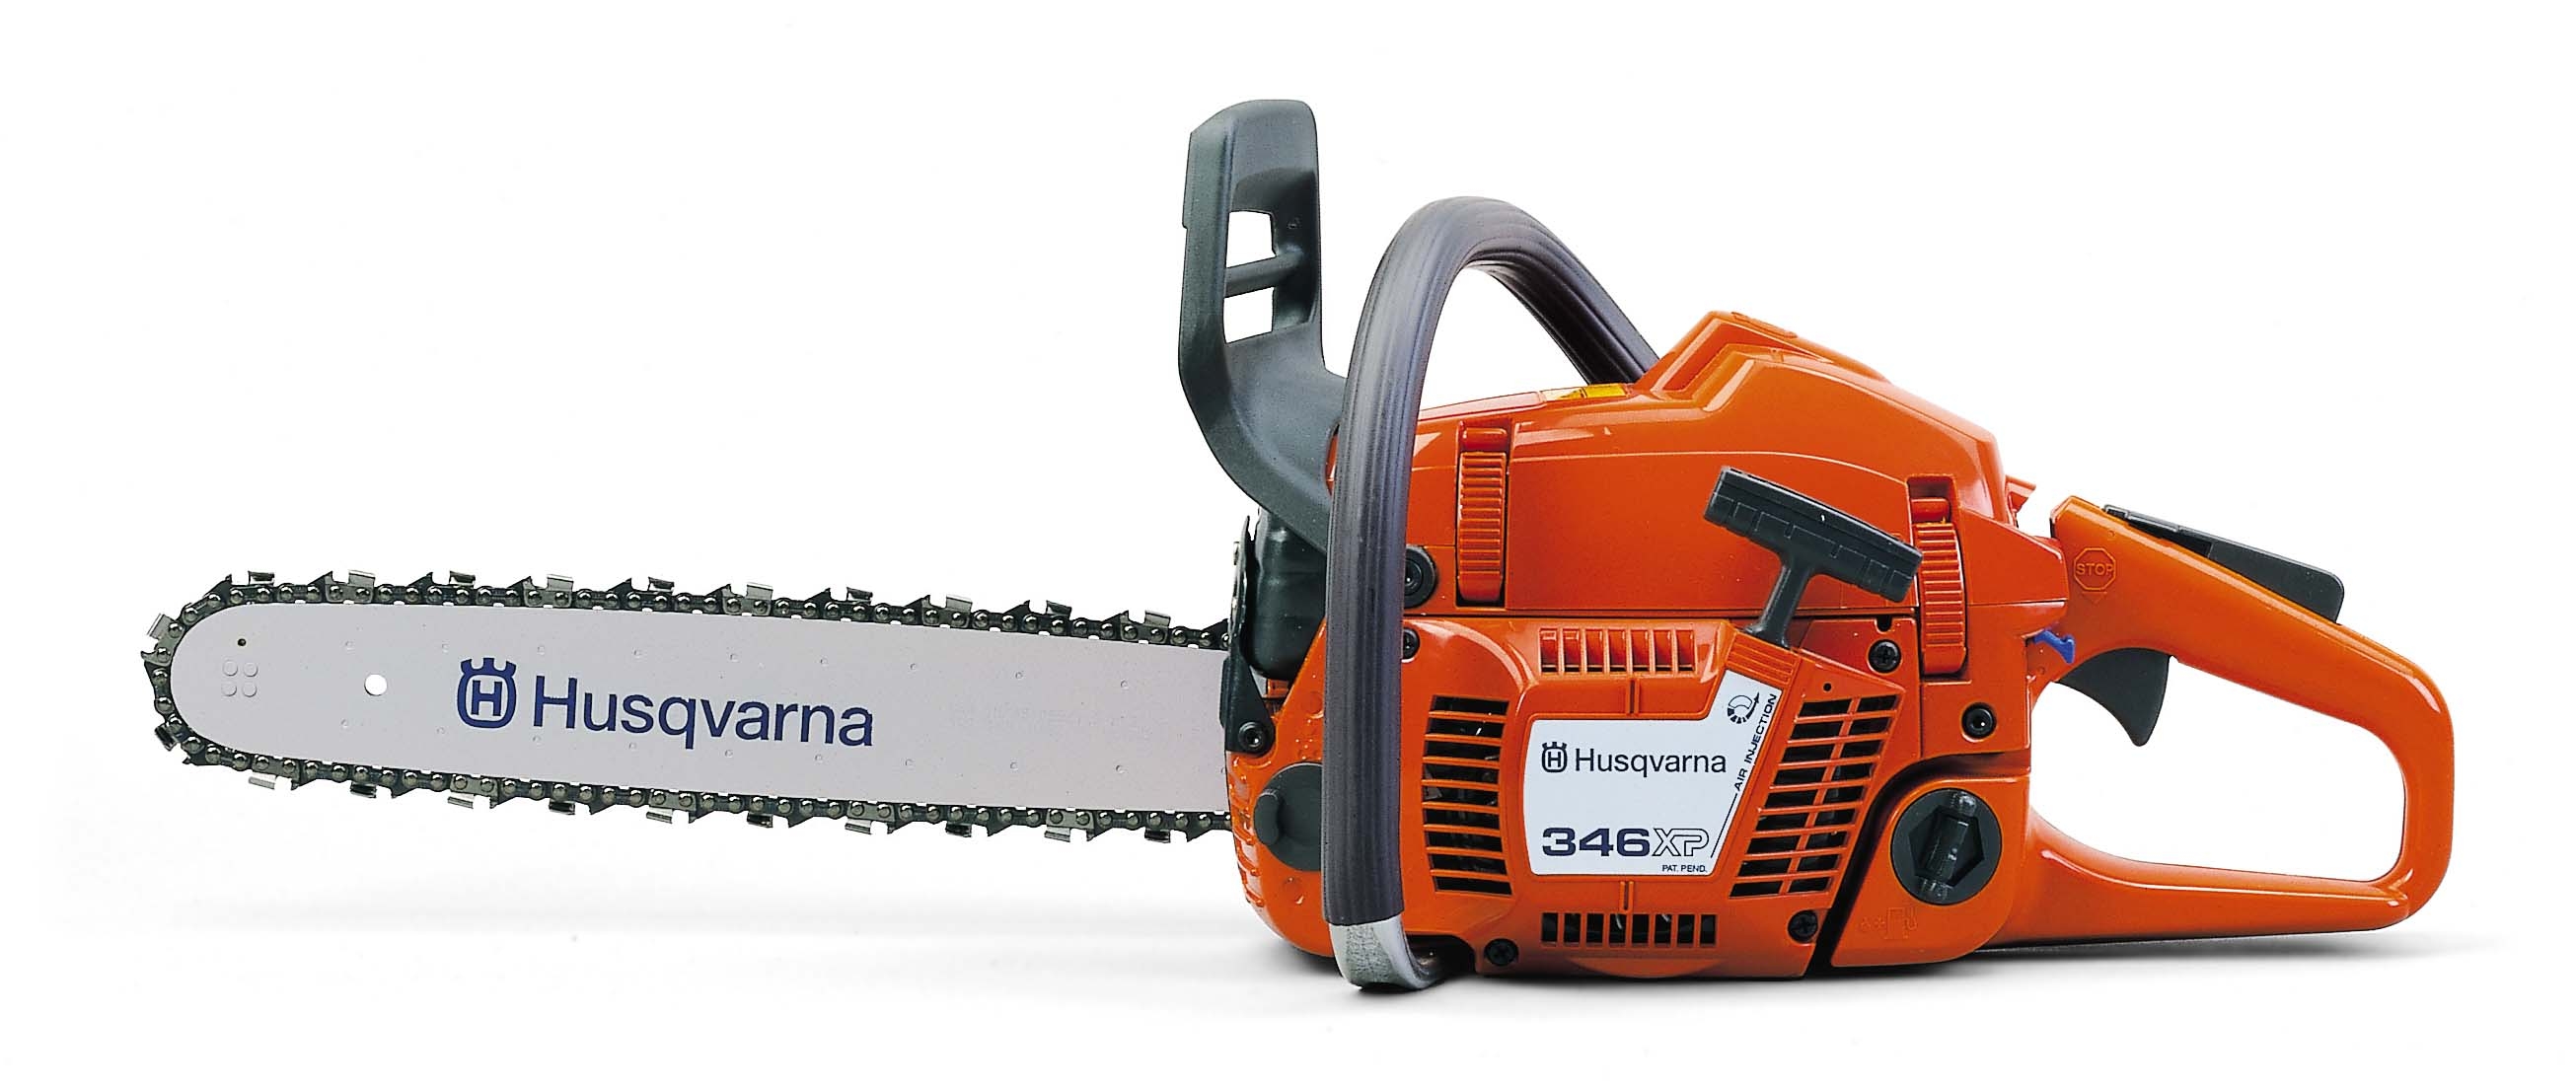 chainsaw-image